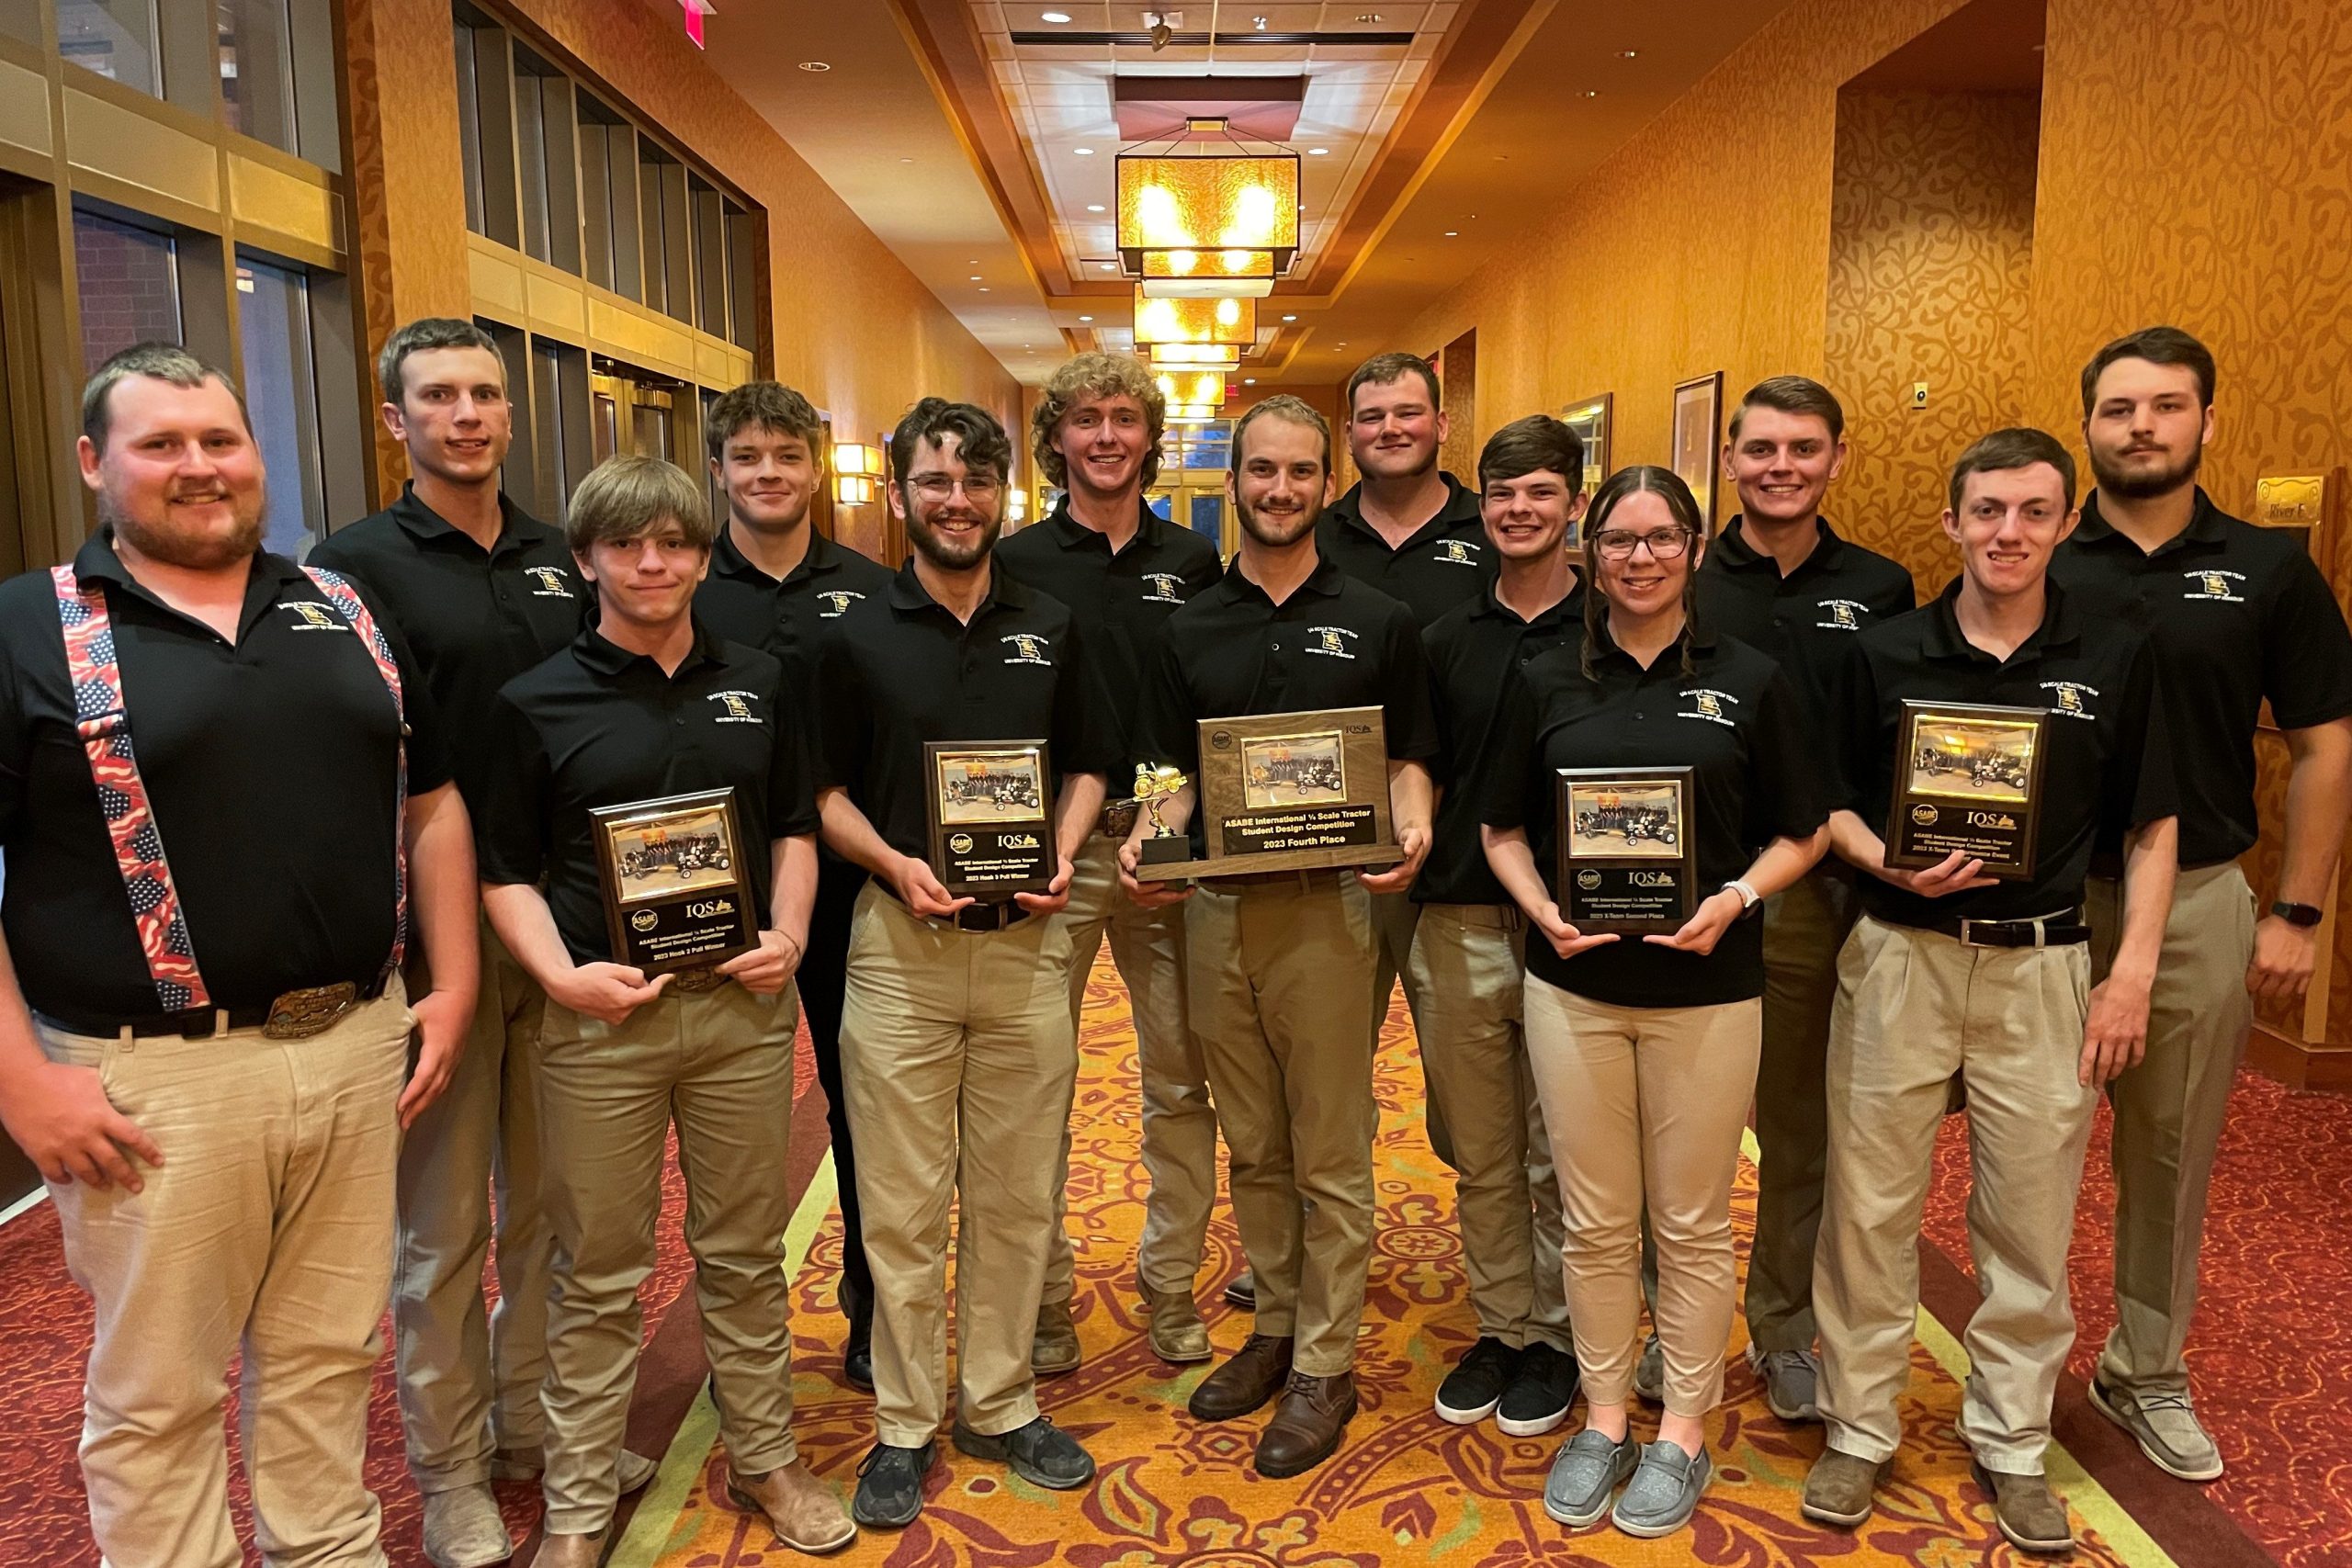 Members of the Torq'N Tigers pose with their awards after the competition banquet.